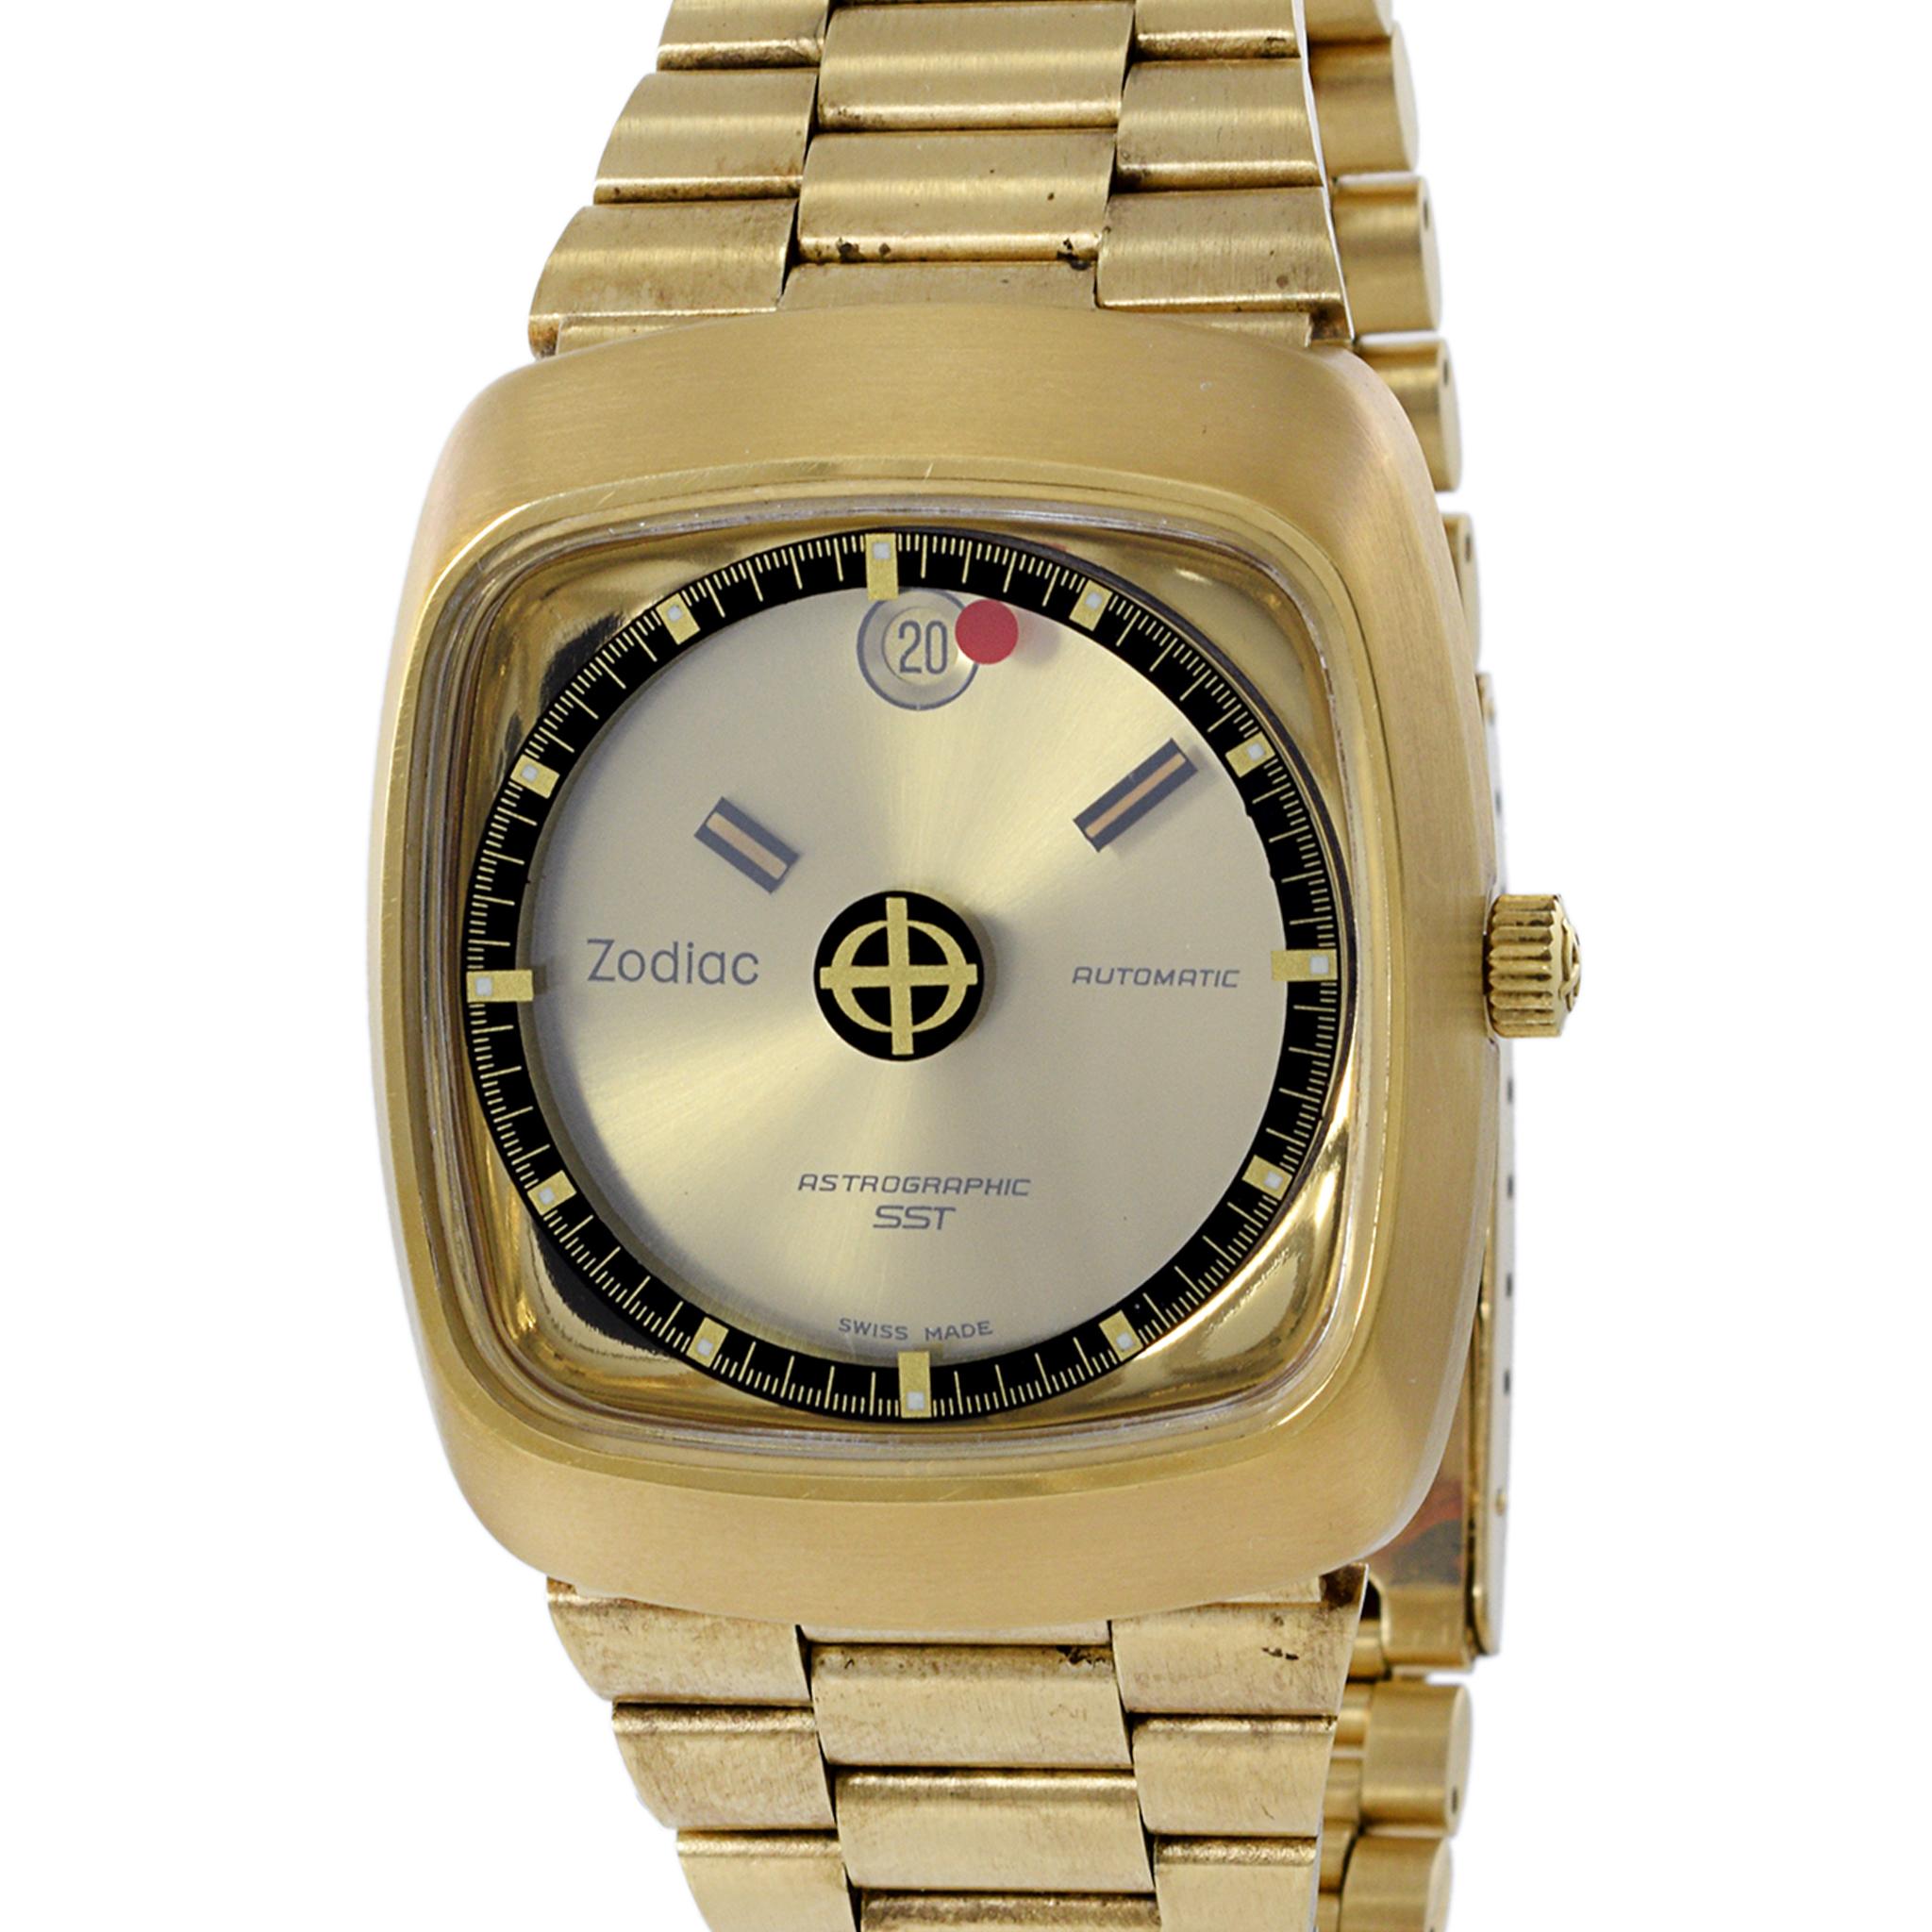 Zodiac Astrographic SST TV Case Watch 1971 Manufacture Full Set NOS Condition In New Condition For Sale In New York, NY